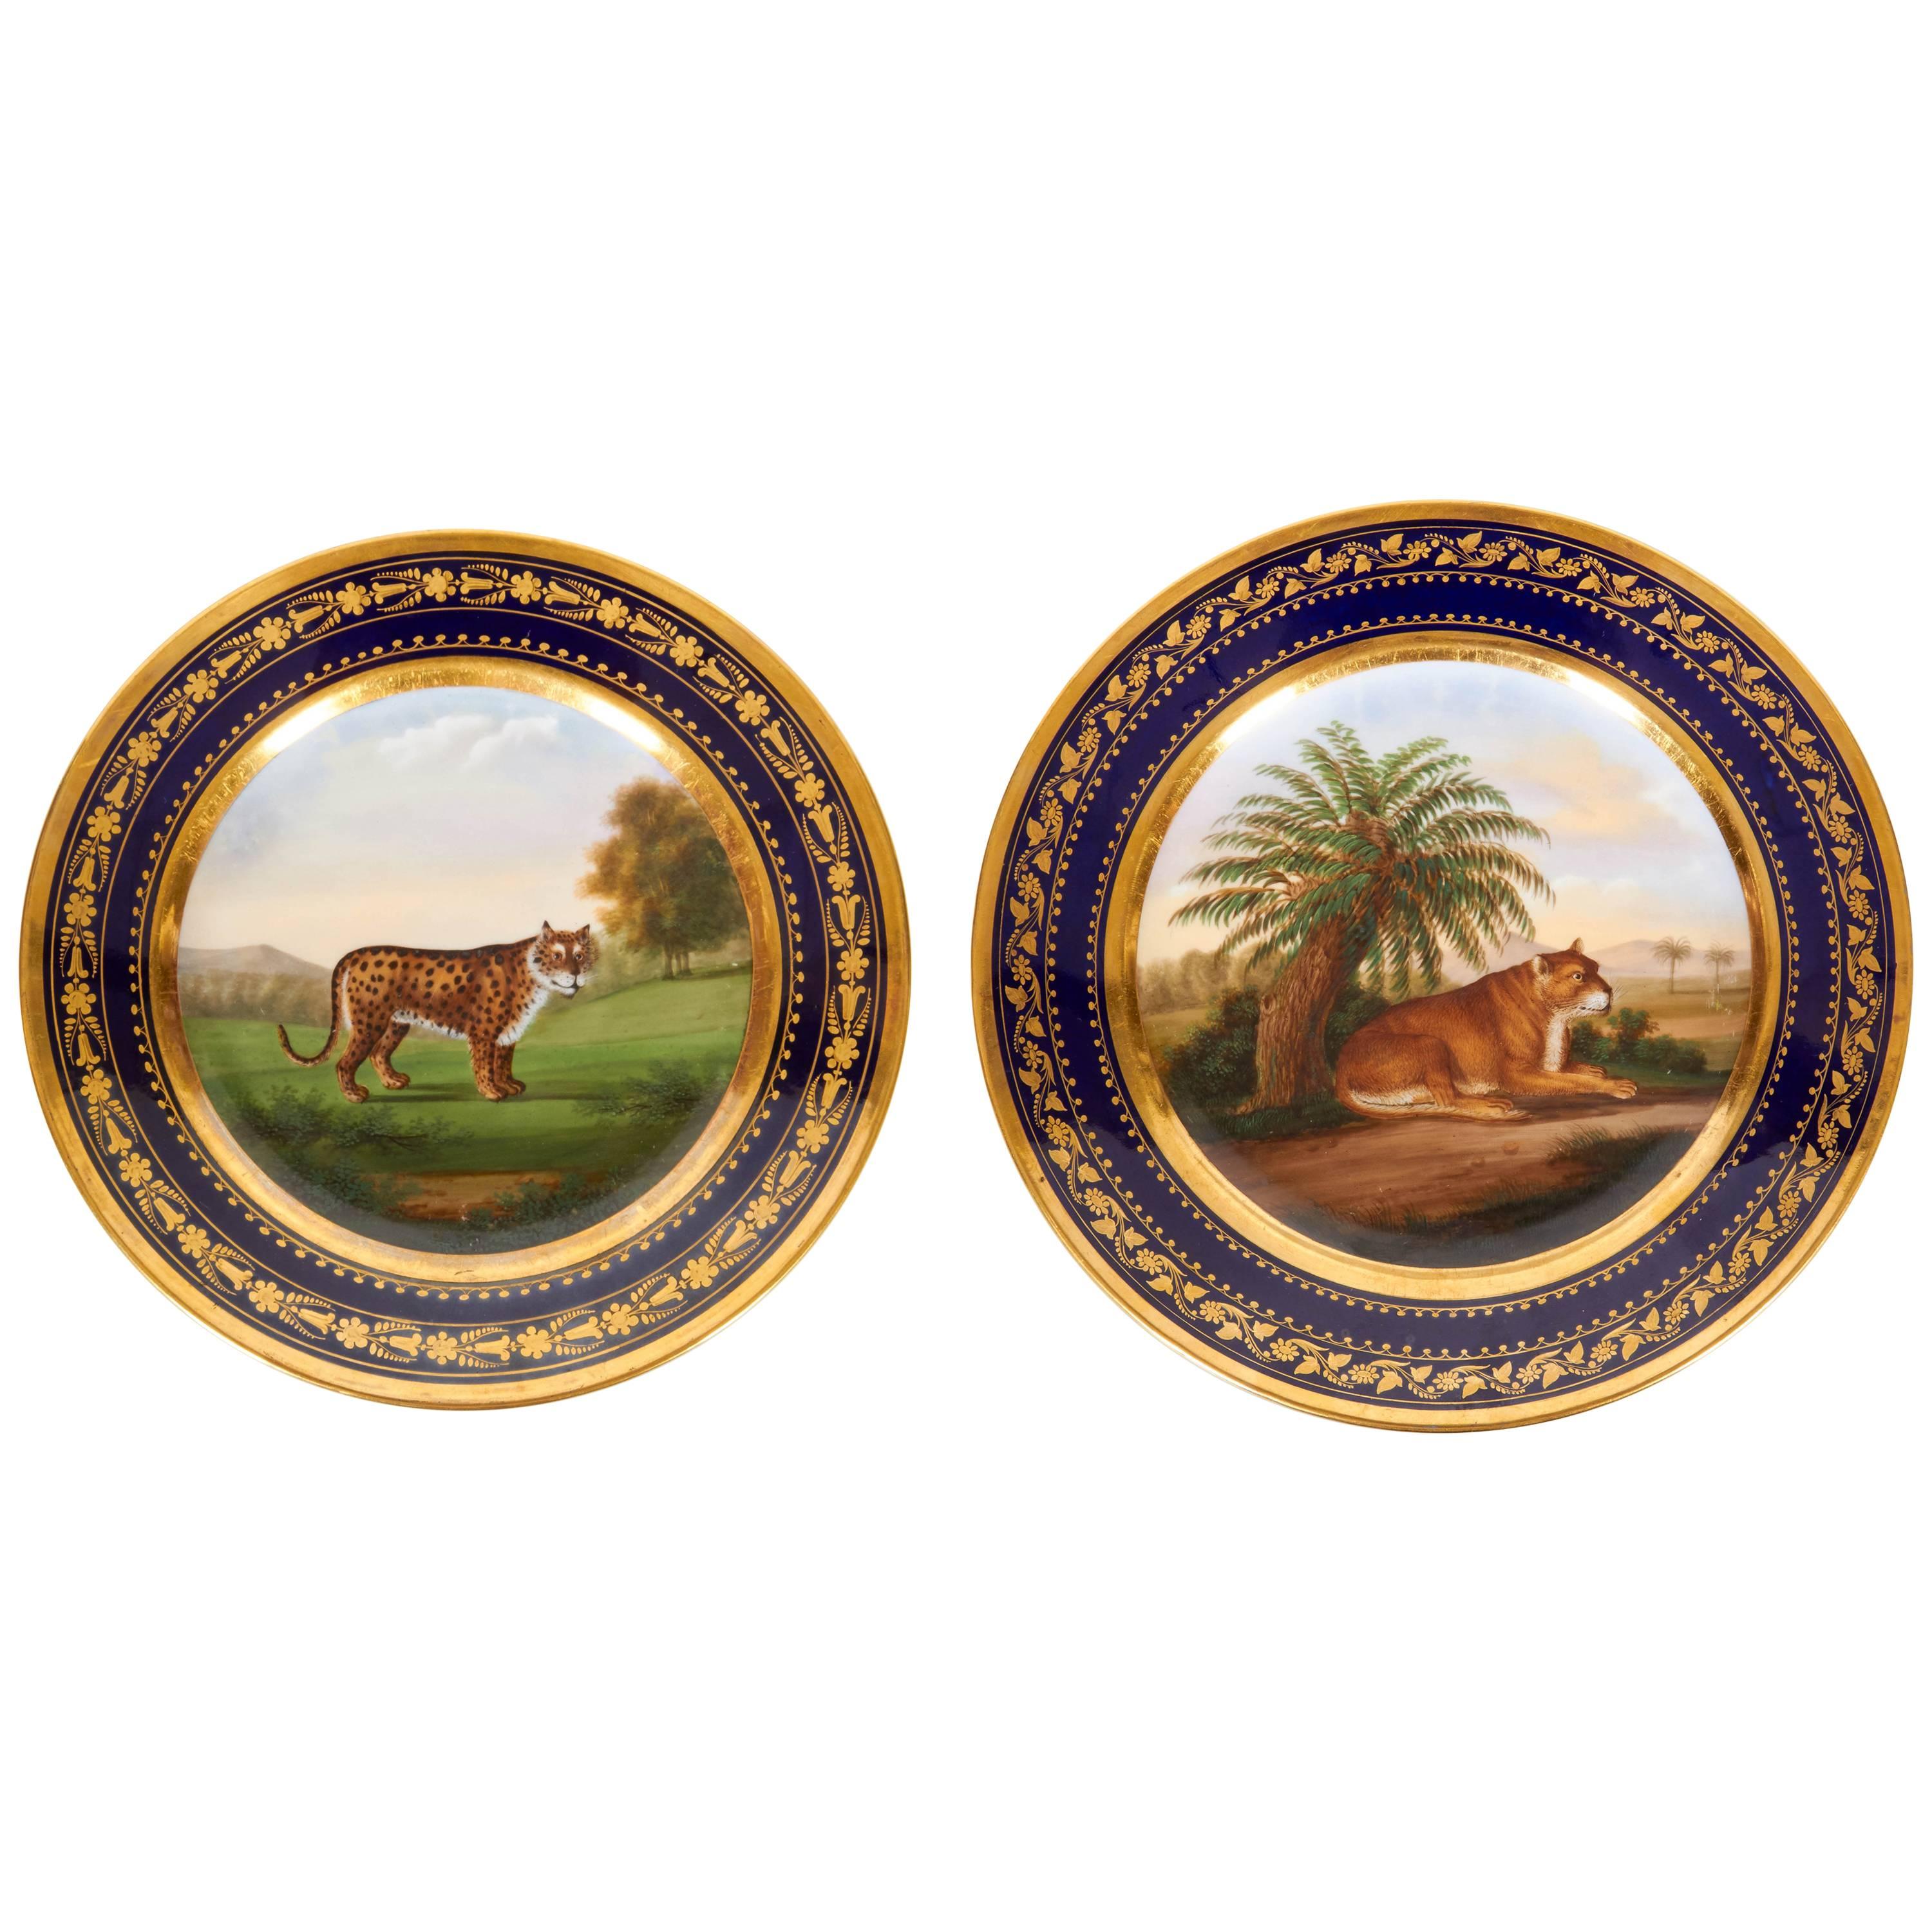 Pair of "Darte Brothers" Porcelain Plates of Lioness and Cheetah For Sale